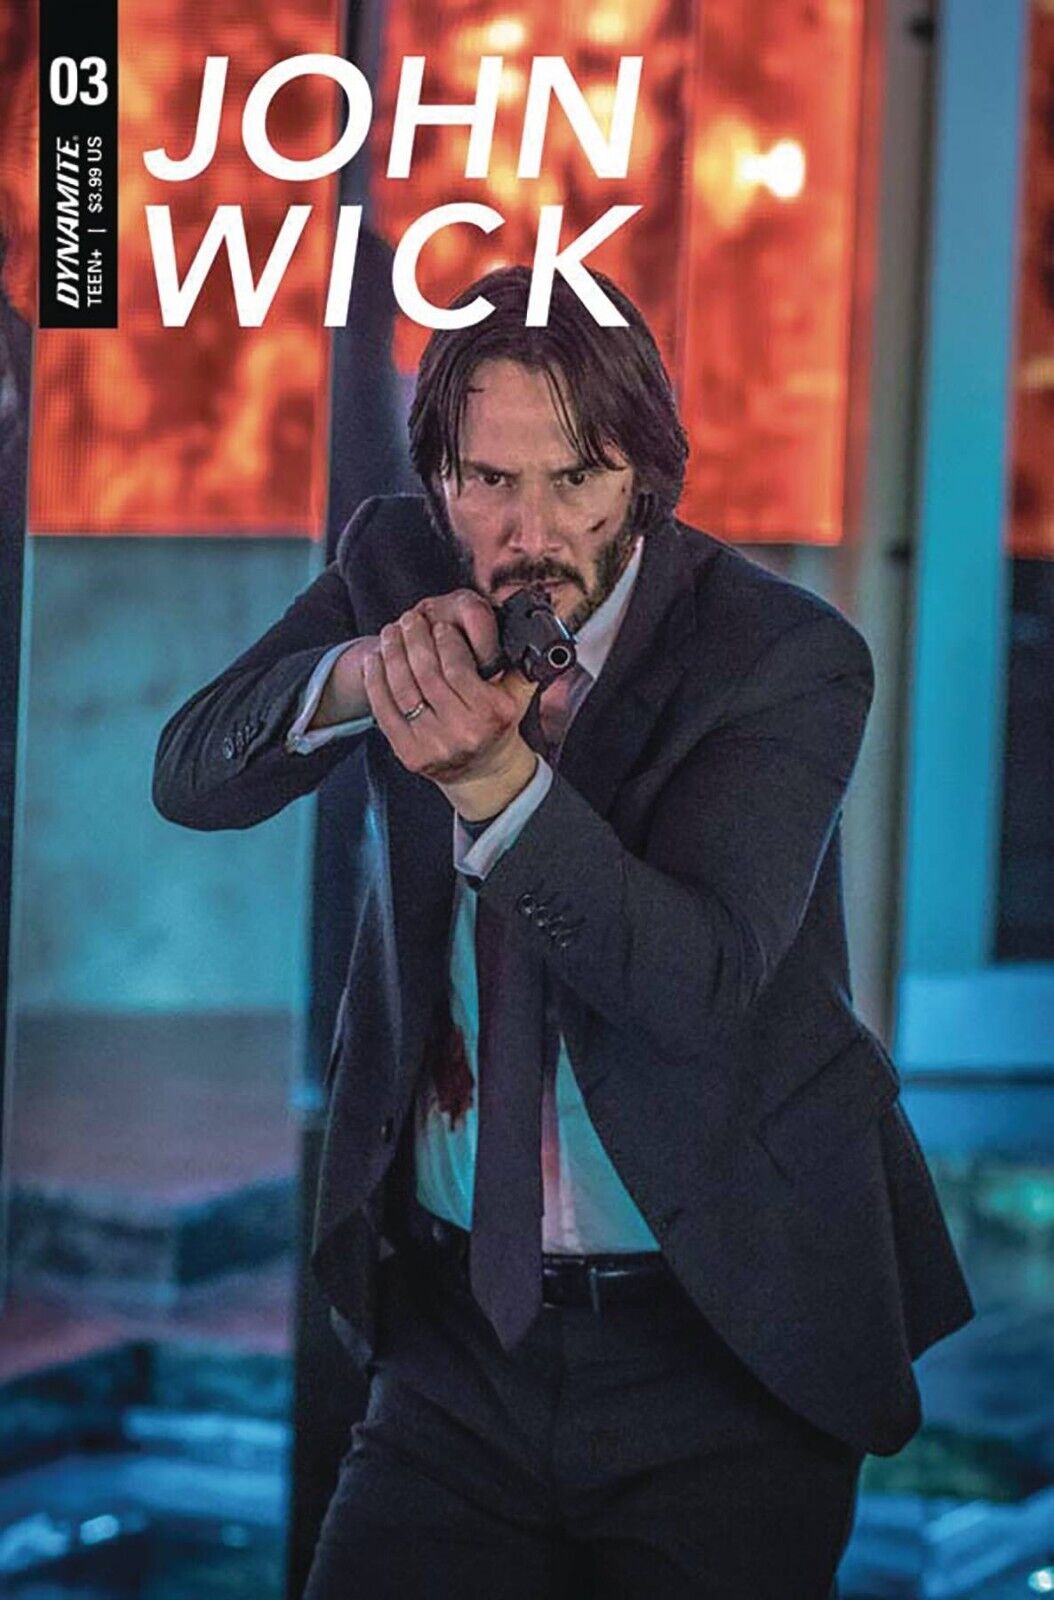 JOHN WICK #3C PHOTO COVER VARIANT BY DYNAMITE ENTERTAINMENT  2019